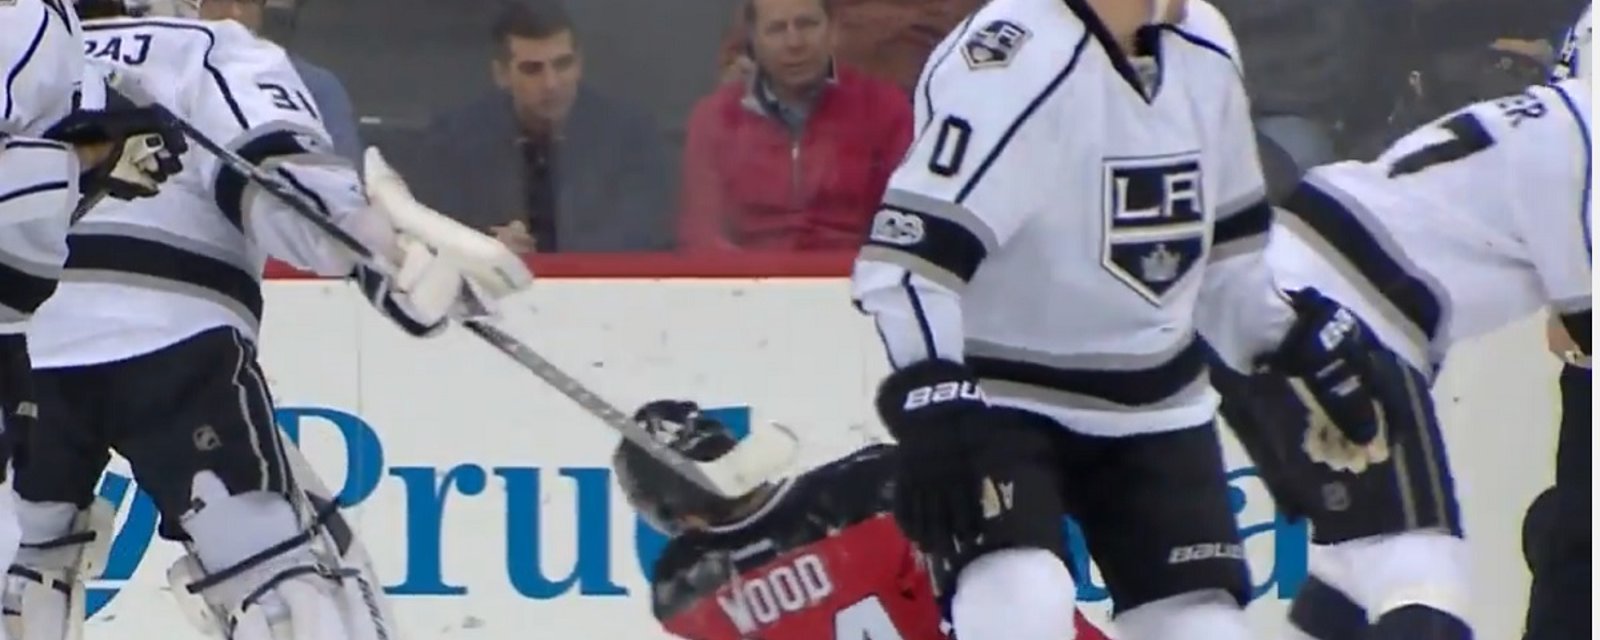 Must see: NHL goalie hooks rookie player in the face with his stick.